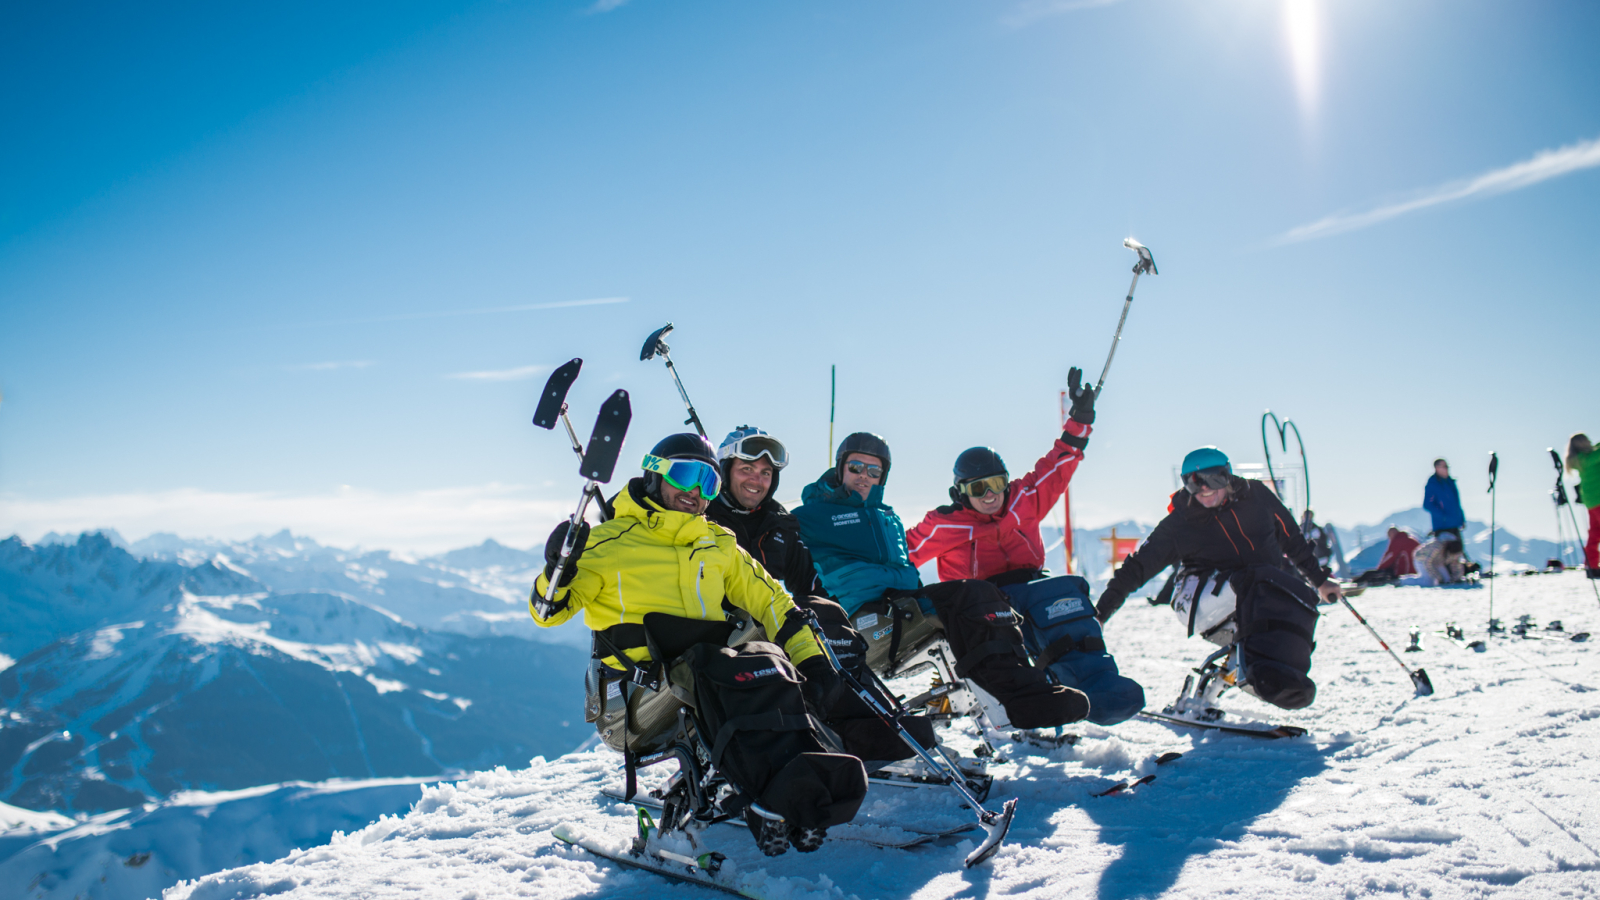 At Starski, we believe that skiing is for everyone.